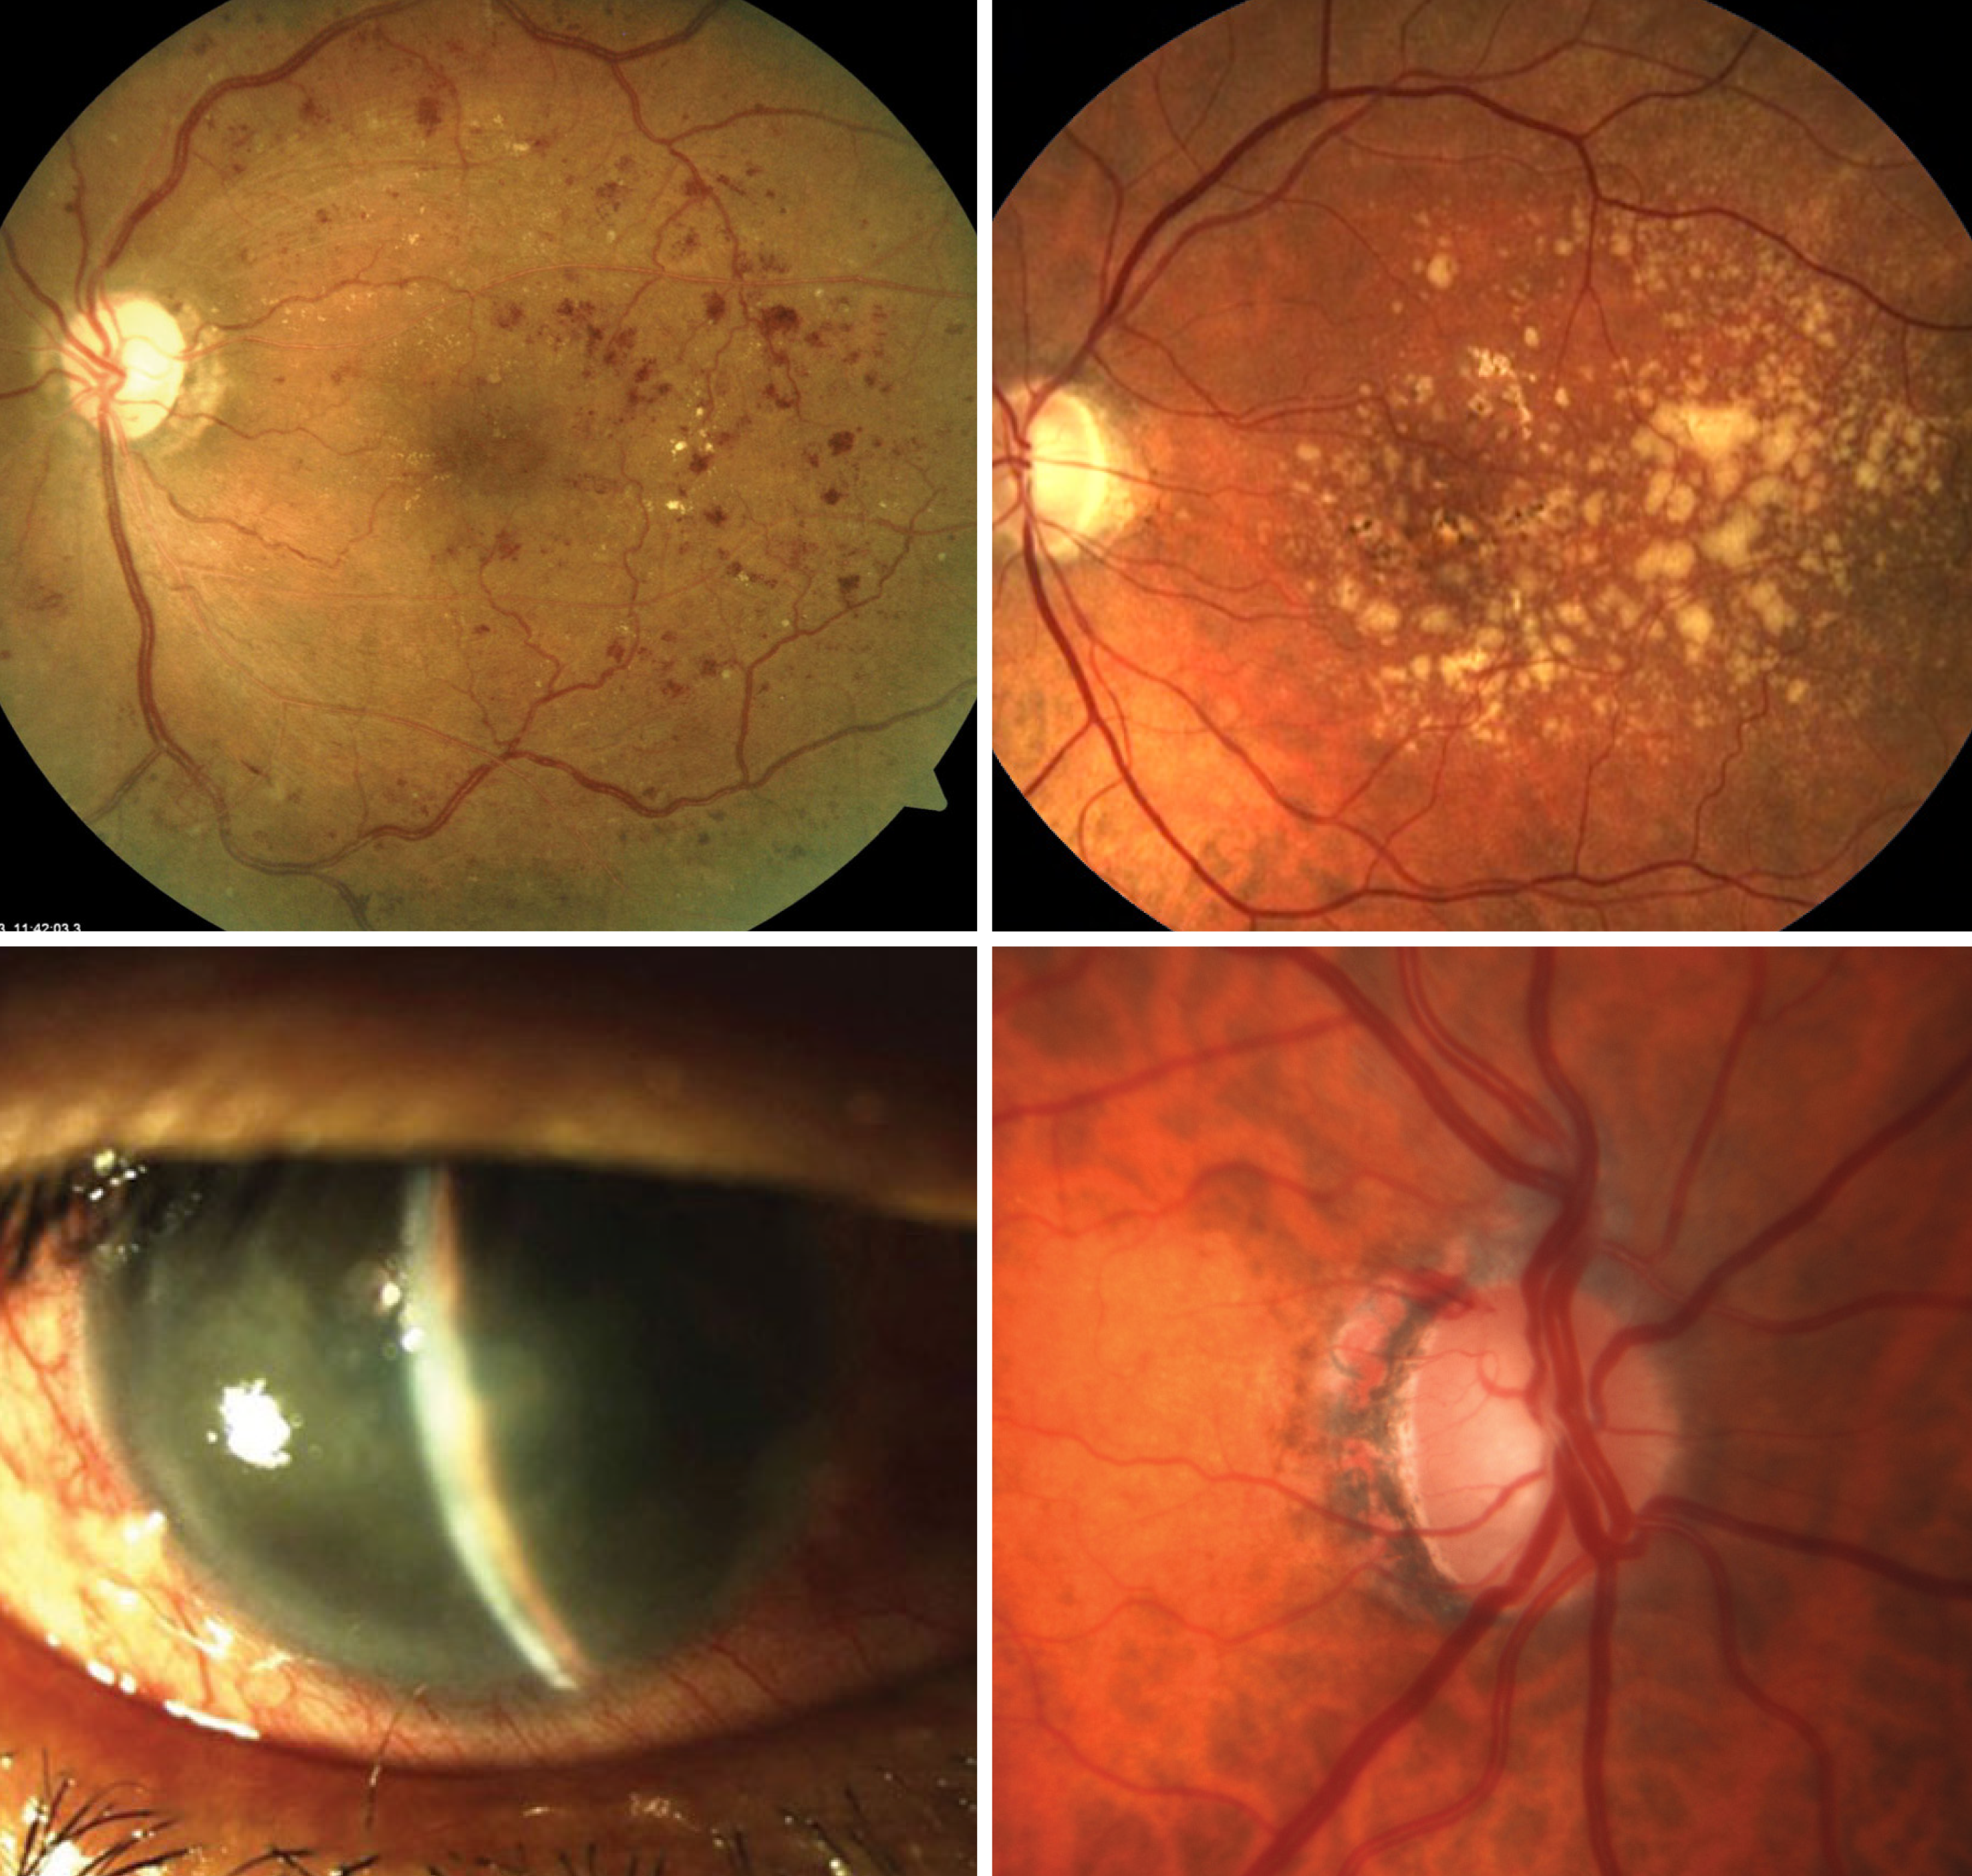 Lengthening of the eye in myopia development confers a protective effect against DR (upper left), AMD (upper right) and angle closure glaucoma (lower left) but elevates risk of open-angle glaucoma (lower right), in addition to increased risk of myopic macular degeneration and non-glaucomatous optic neuropathy.